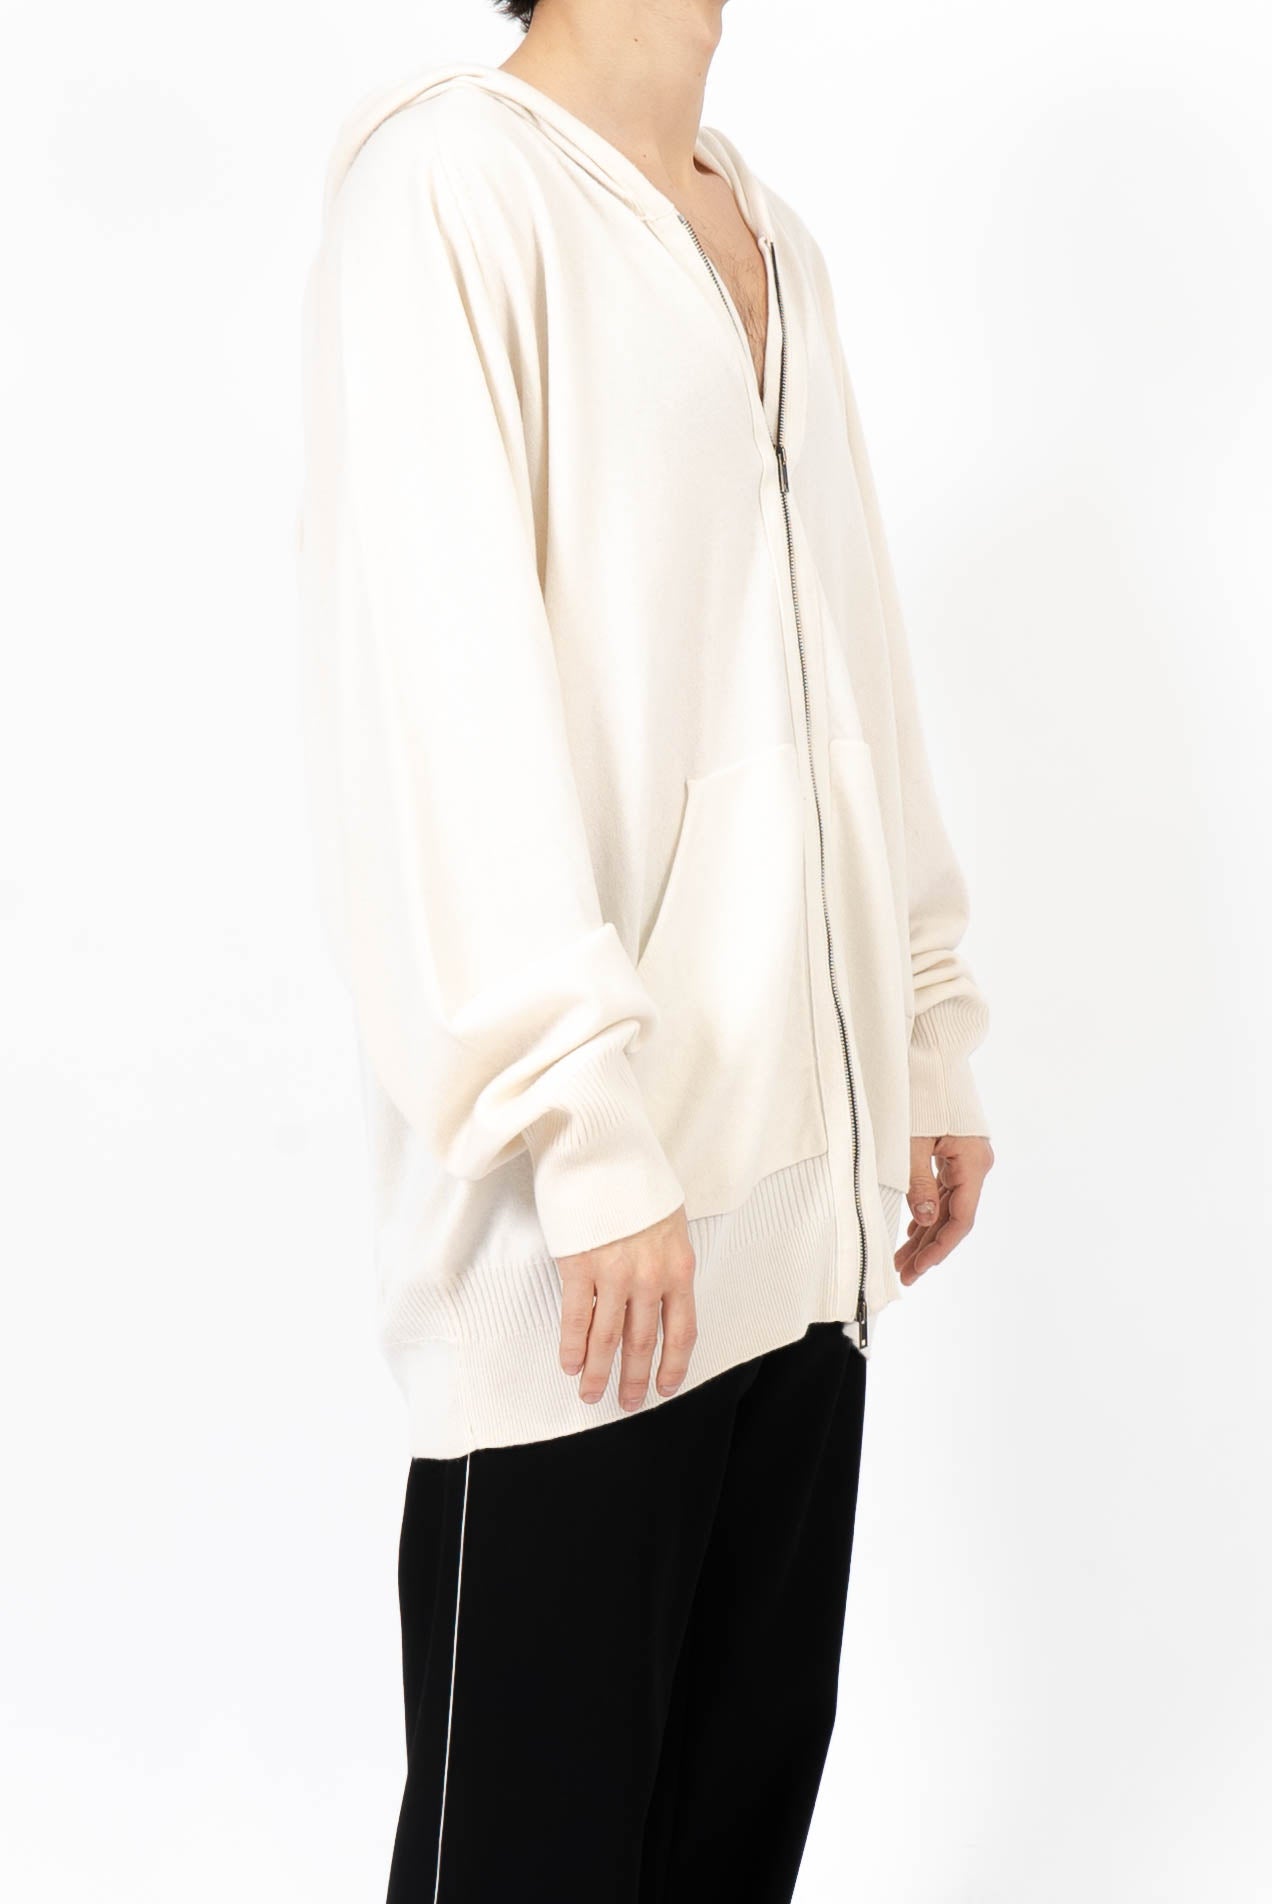 SS13 White Cashmere Hoodie